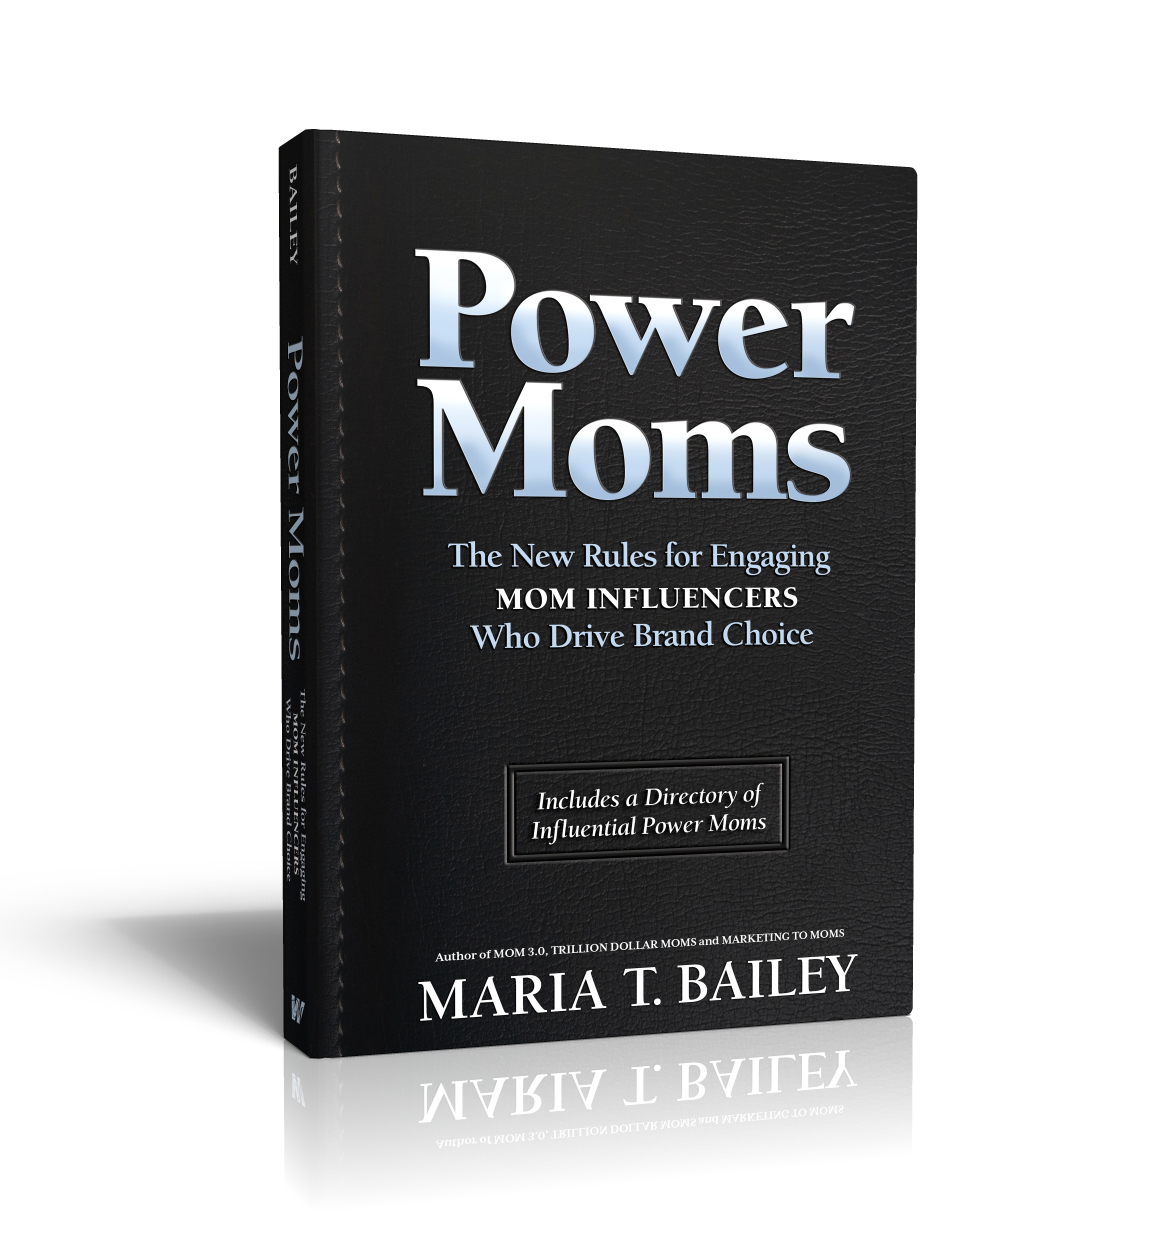 POWER MOMS by Maria Bailey